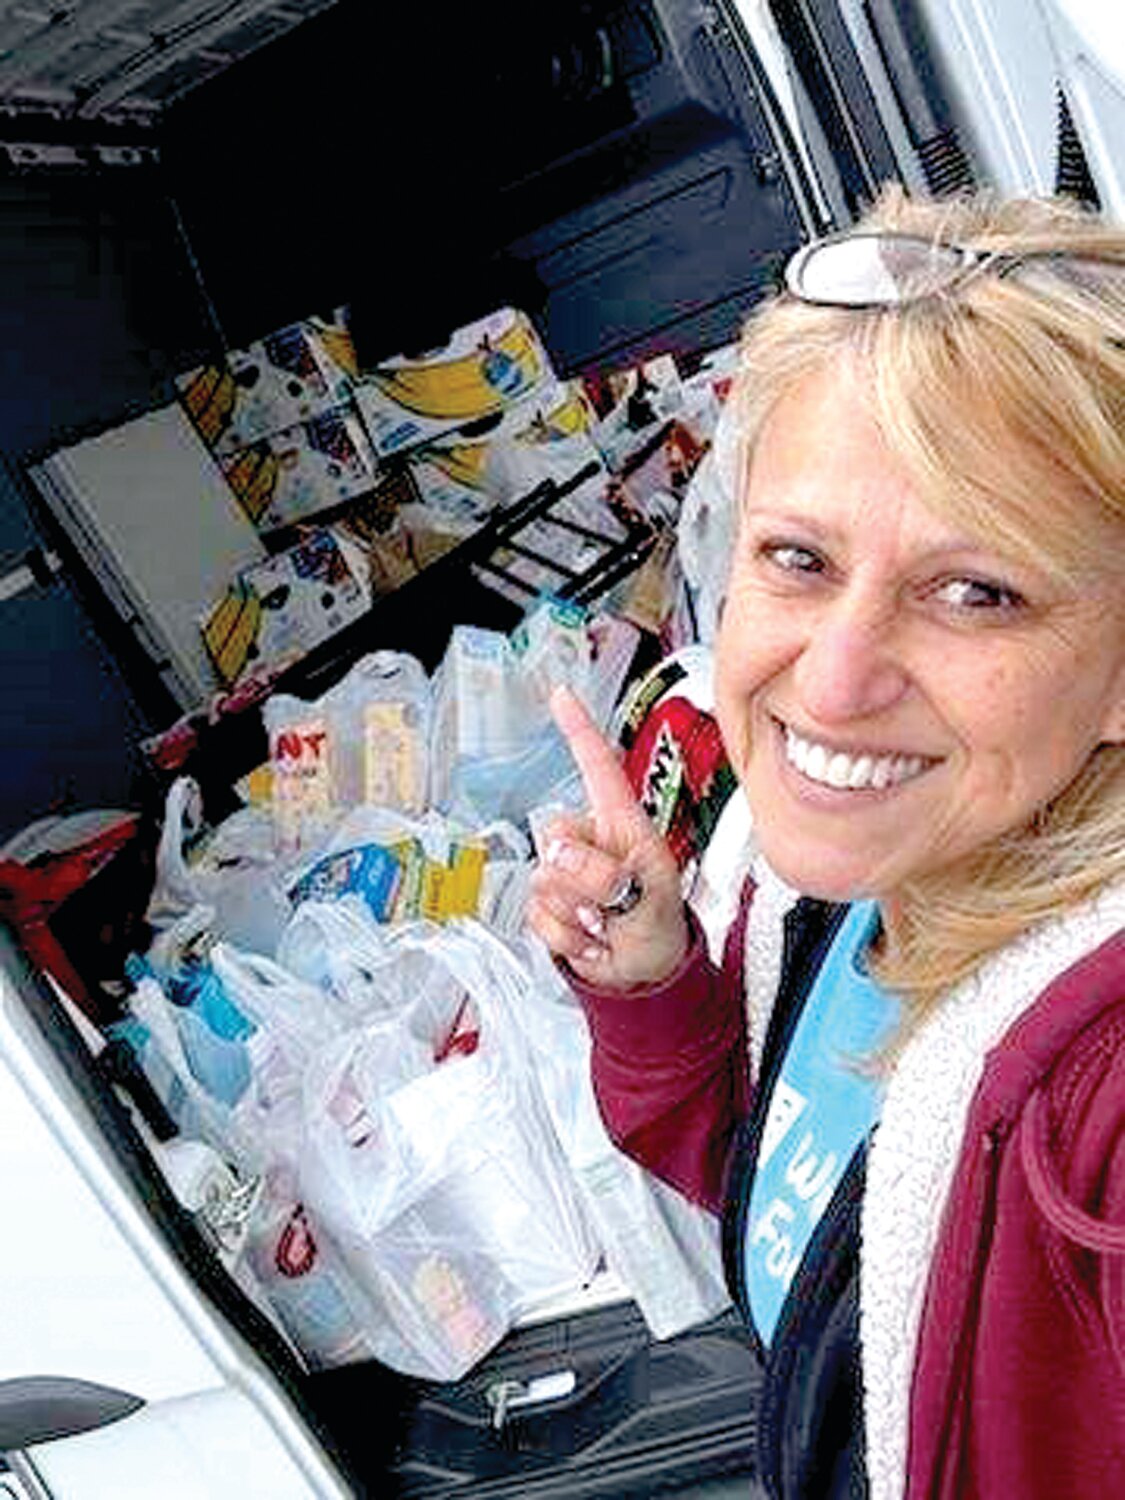 Melody Latare of Warminster Food Bank helps load the truck with groceries donated by Giant Supermarket of Warminster customers and members of the community on Saturday, April 13.